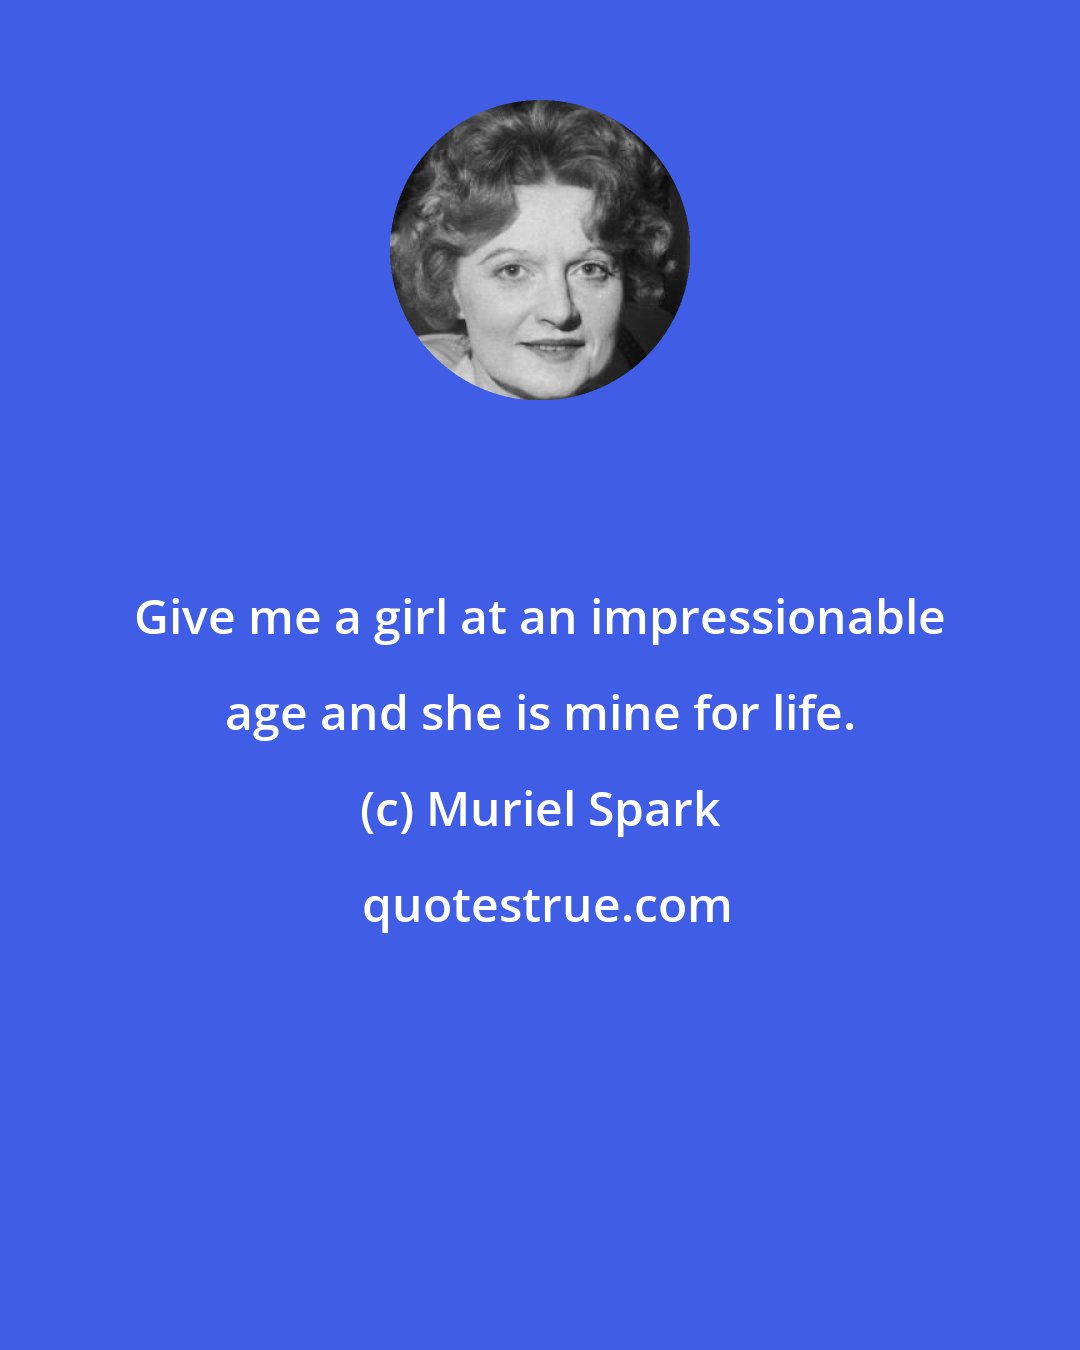 Muriel Spark: Give me a girl at an impressionable age and she is mine for life.